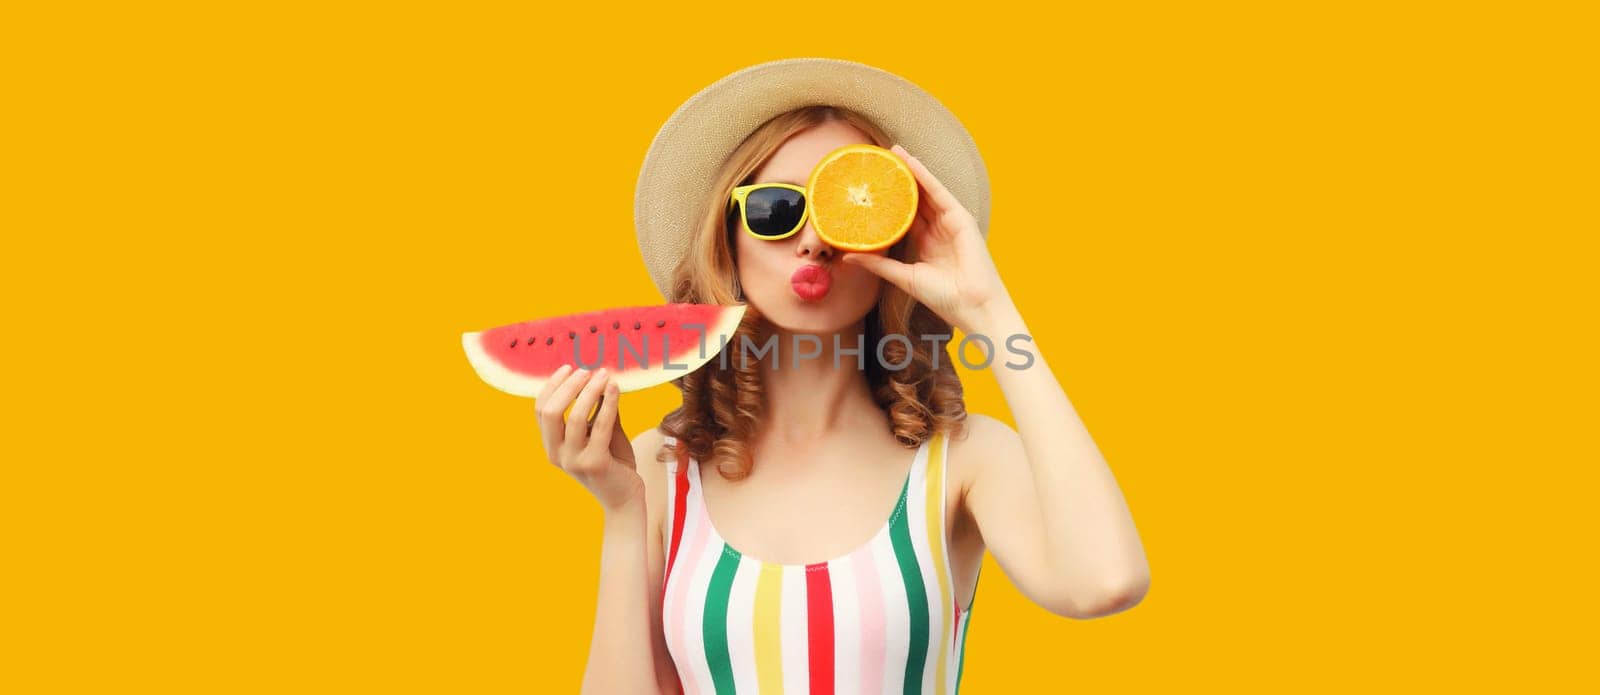 Summer portrait of happy young woman with fresh juicy fruits, slice of watermelon wearing straw hat, glasses and blowing kiss on bright yellow background